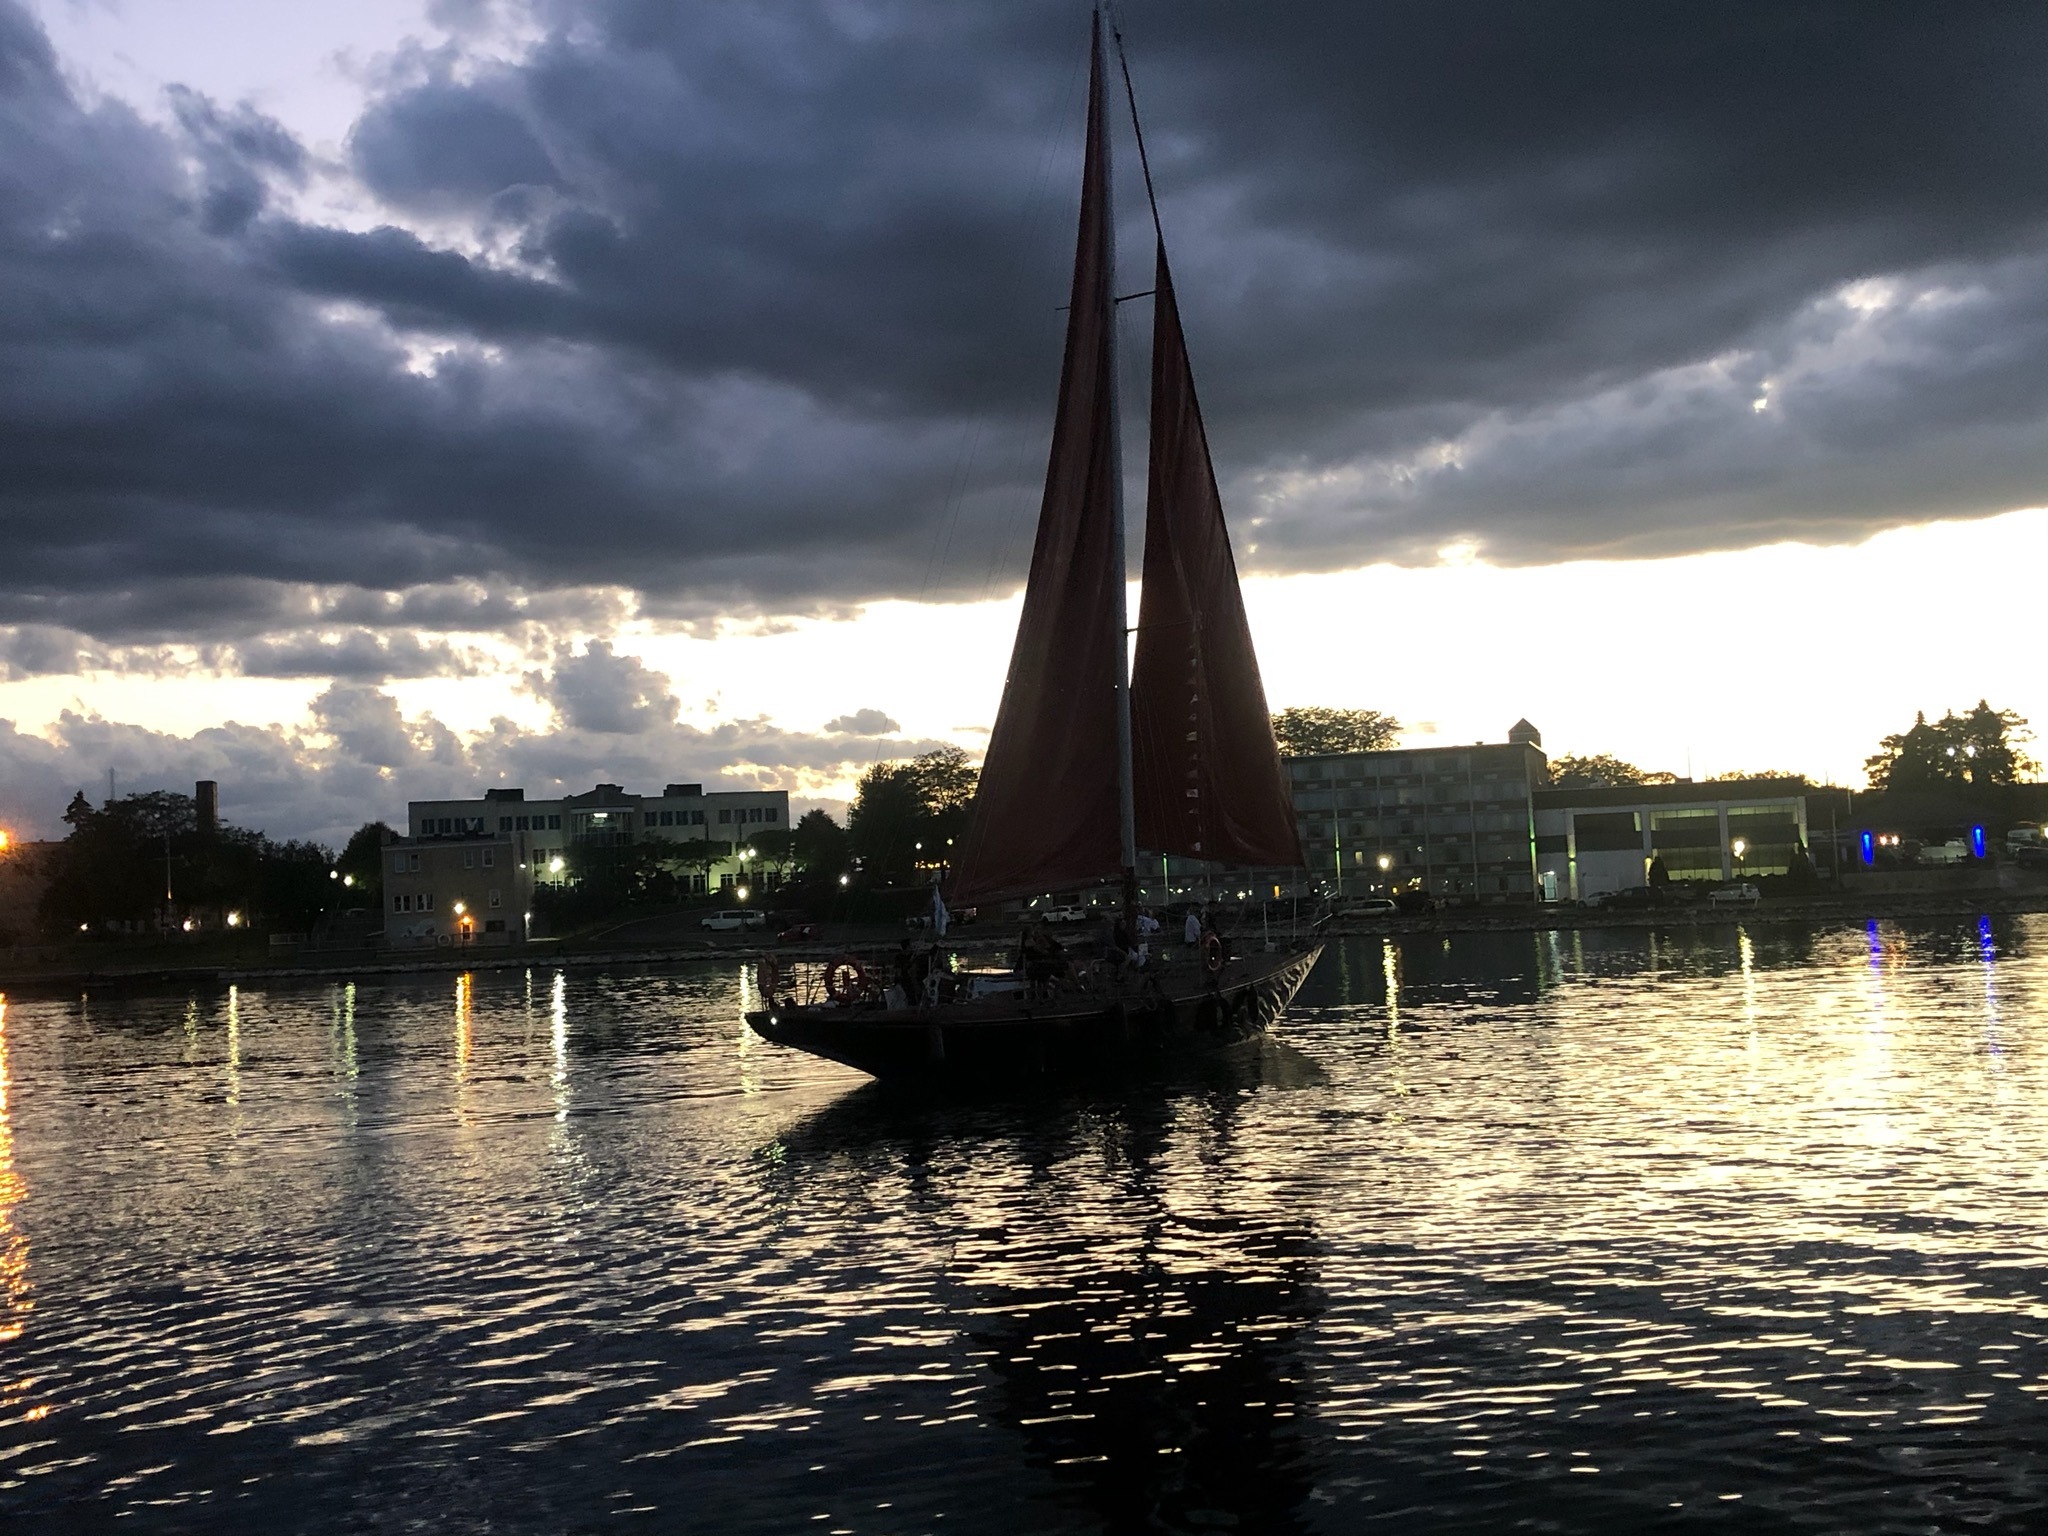 red witch sailboat